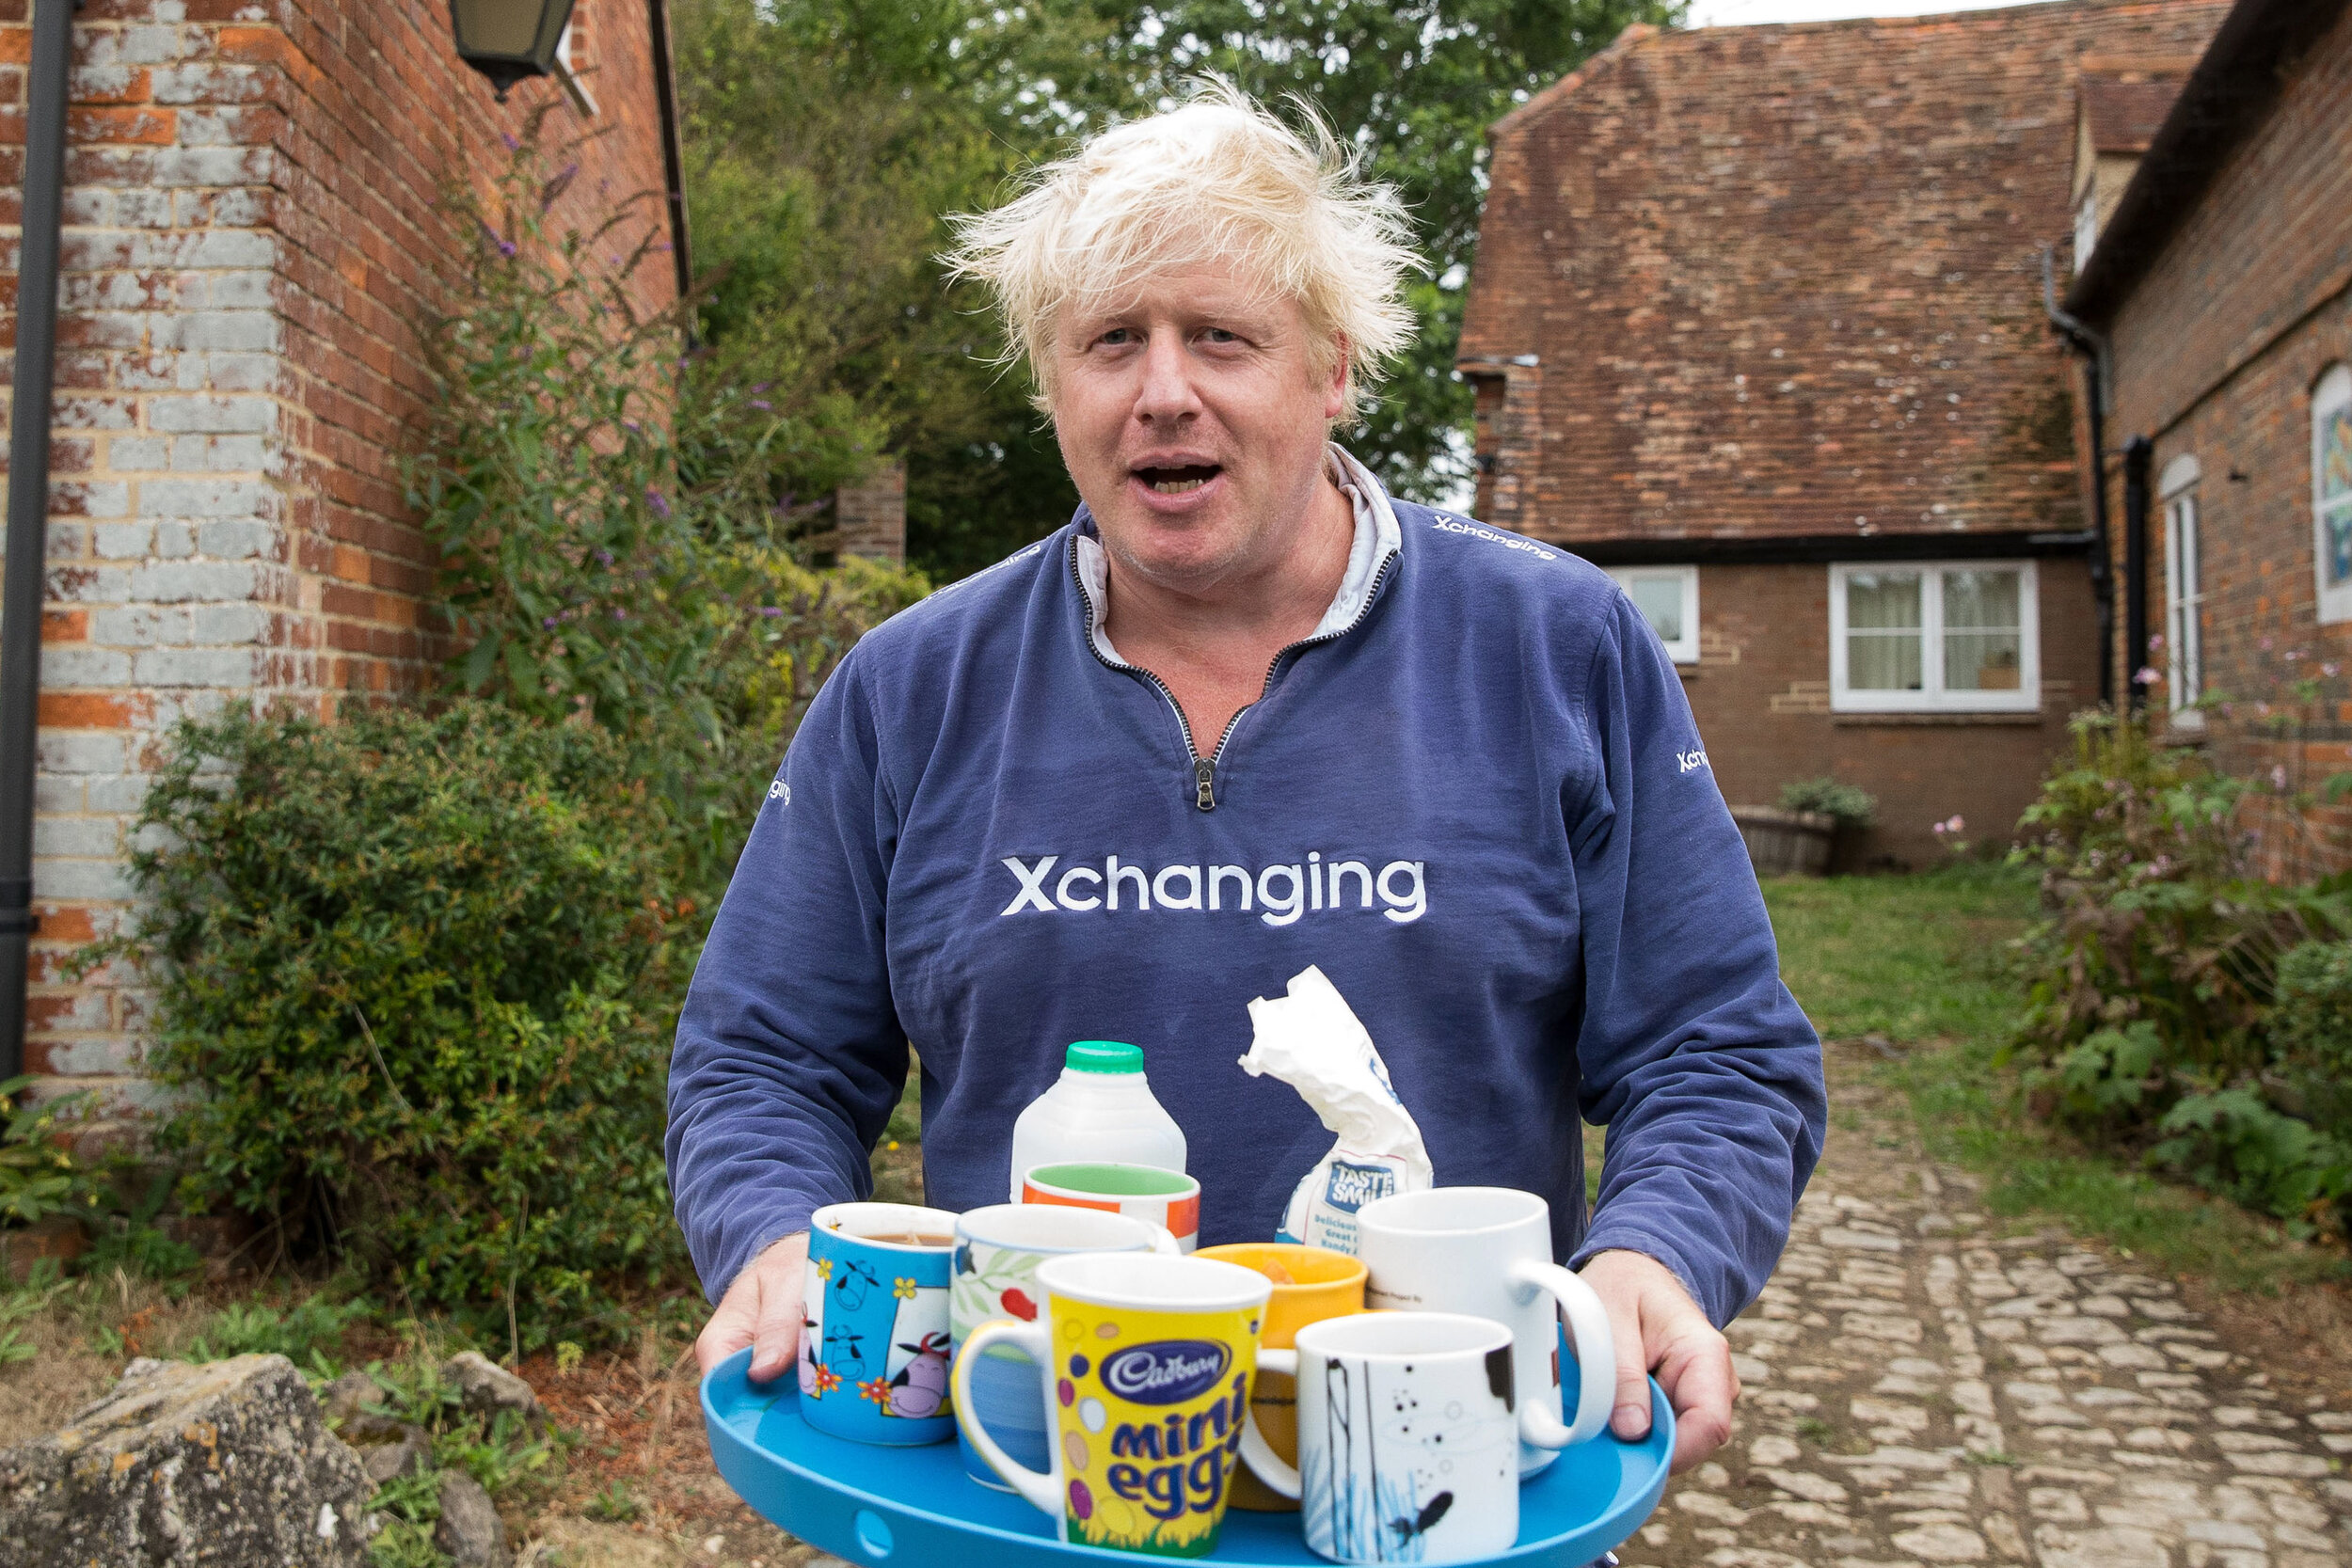  Boris Johnson brings tea for the press to drink outside his house in Thame. Picture by: Aaron Chown/PA Images. Date taken: 12-Aug-2018 